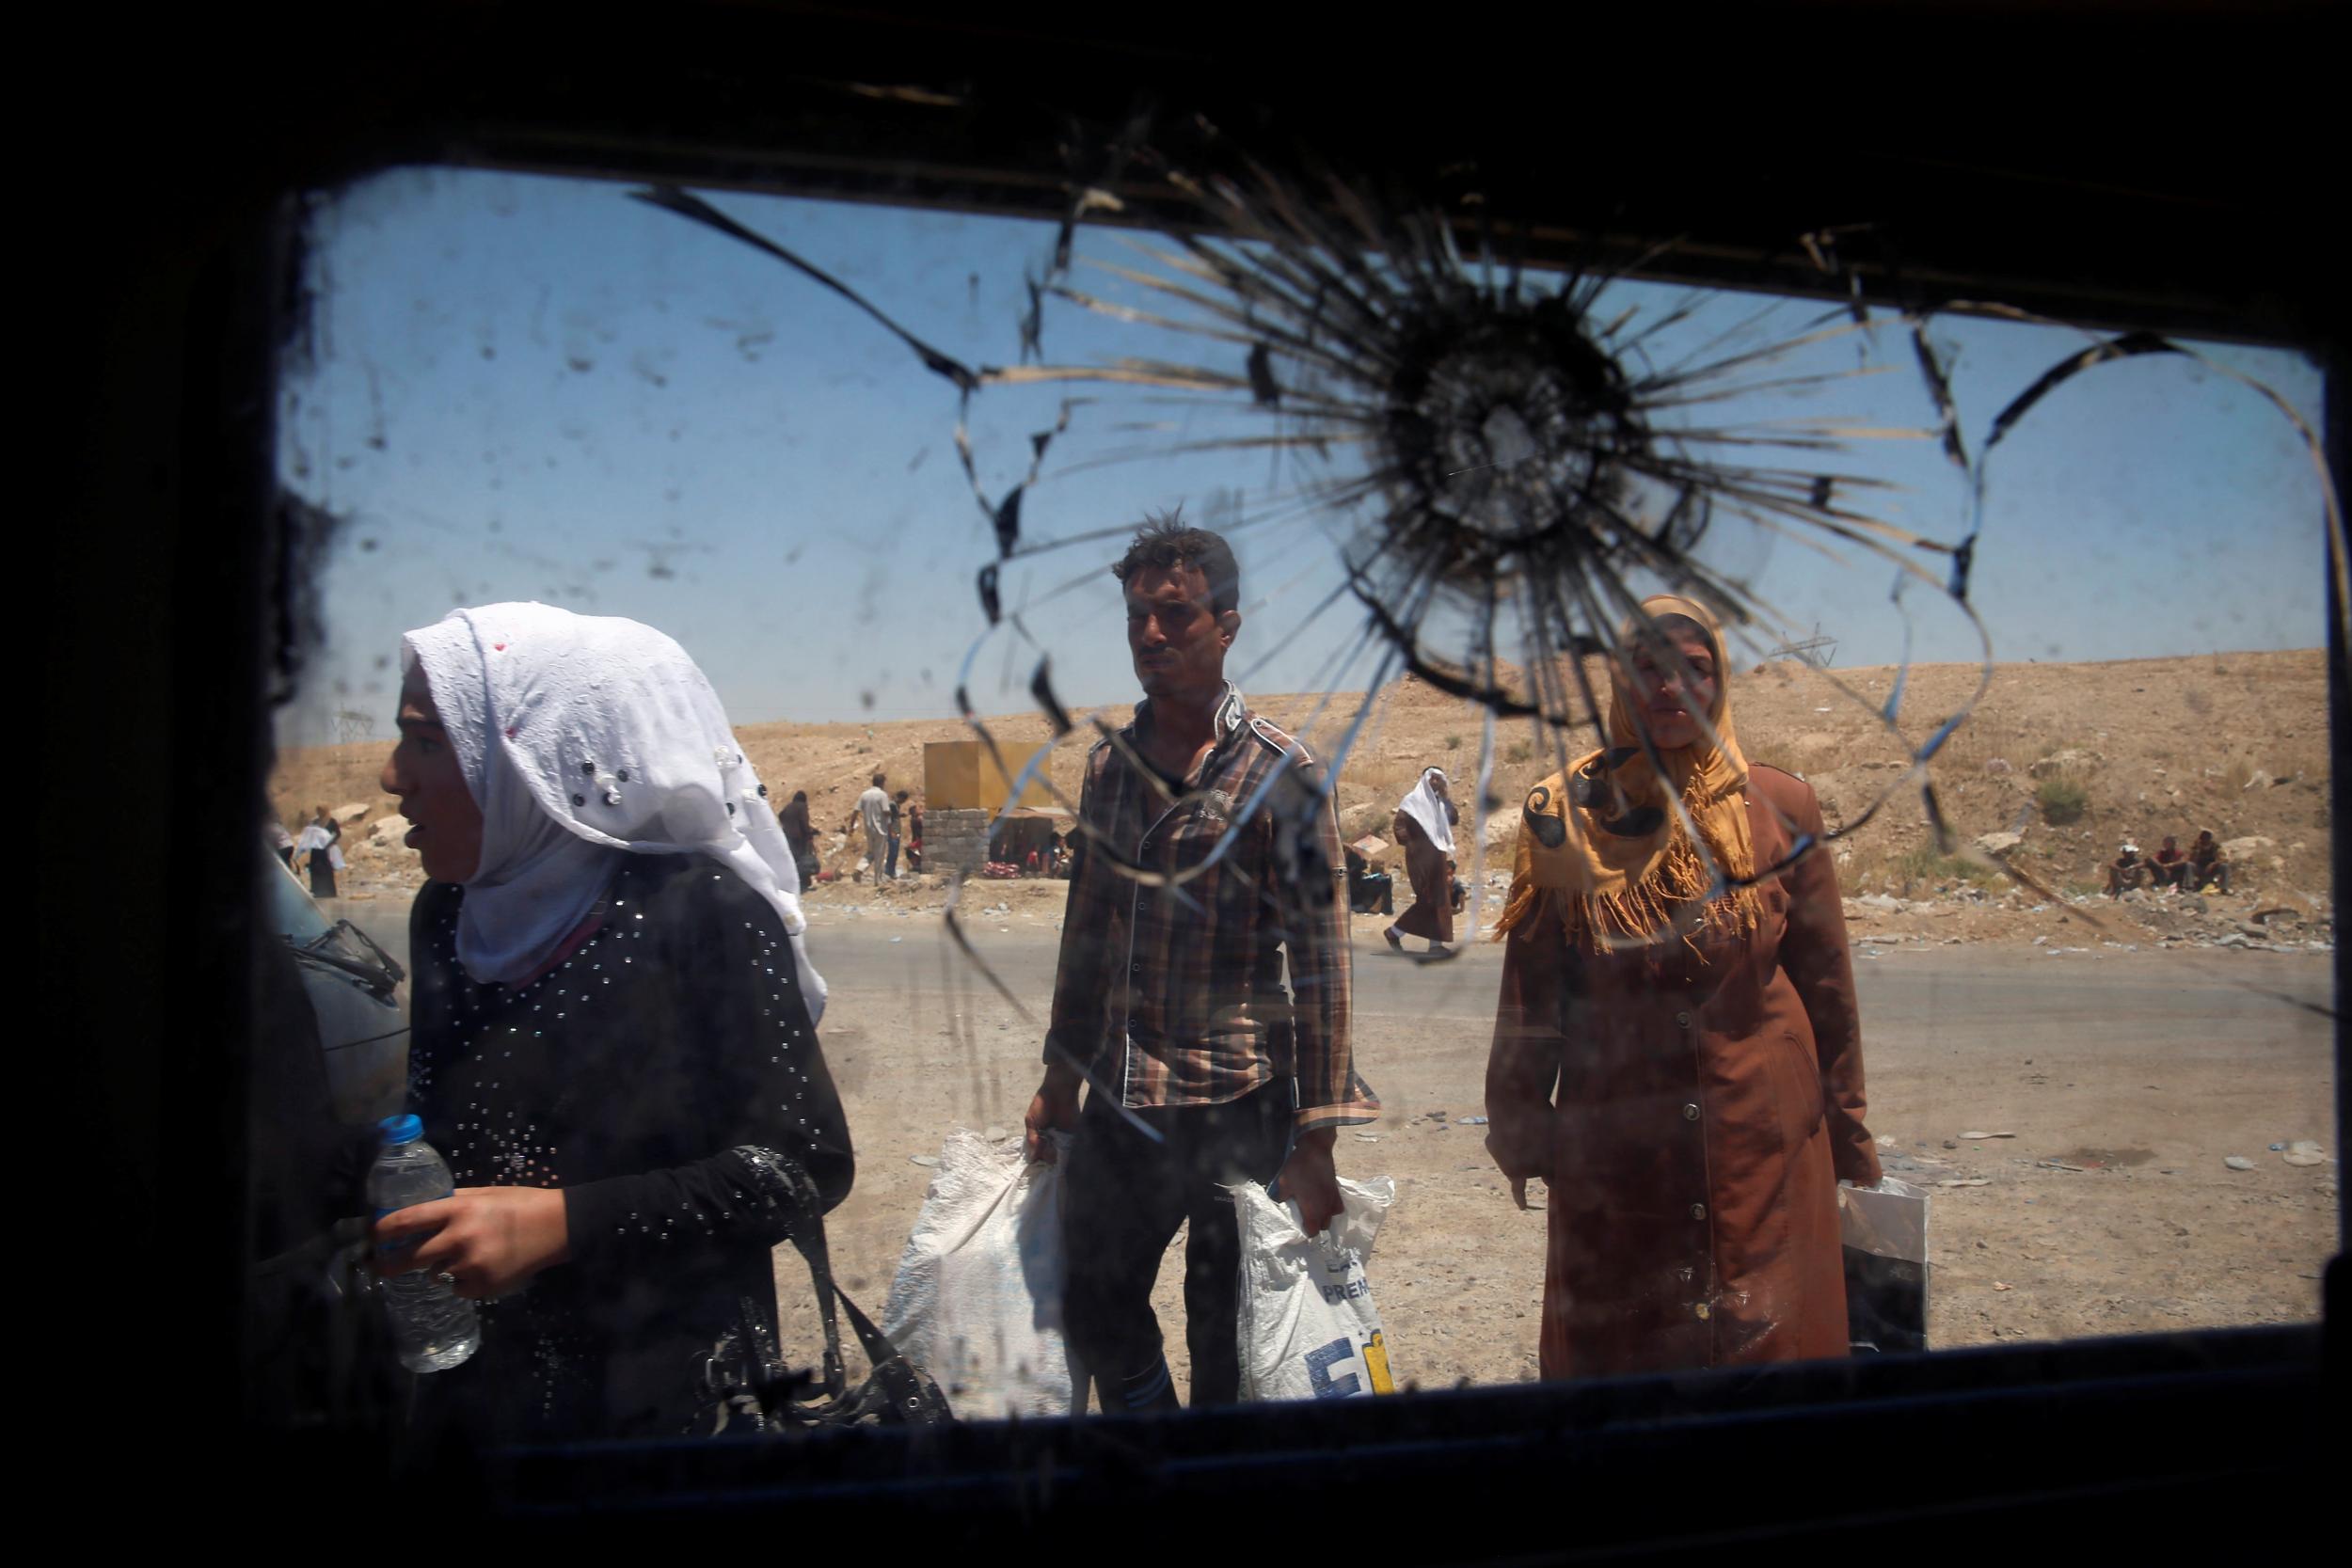 Displaced civilians move past the shattered glass window of an Iraqi forces armoured fighting vehicle in West Mosul, Iraq